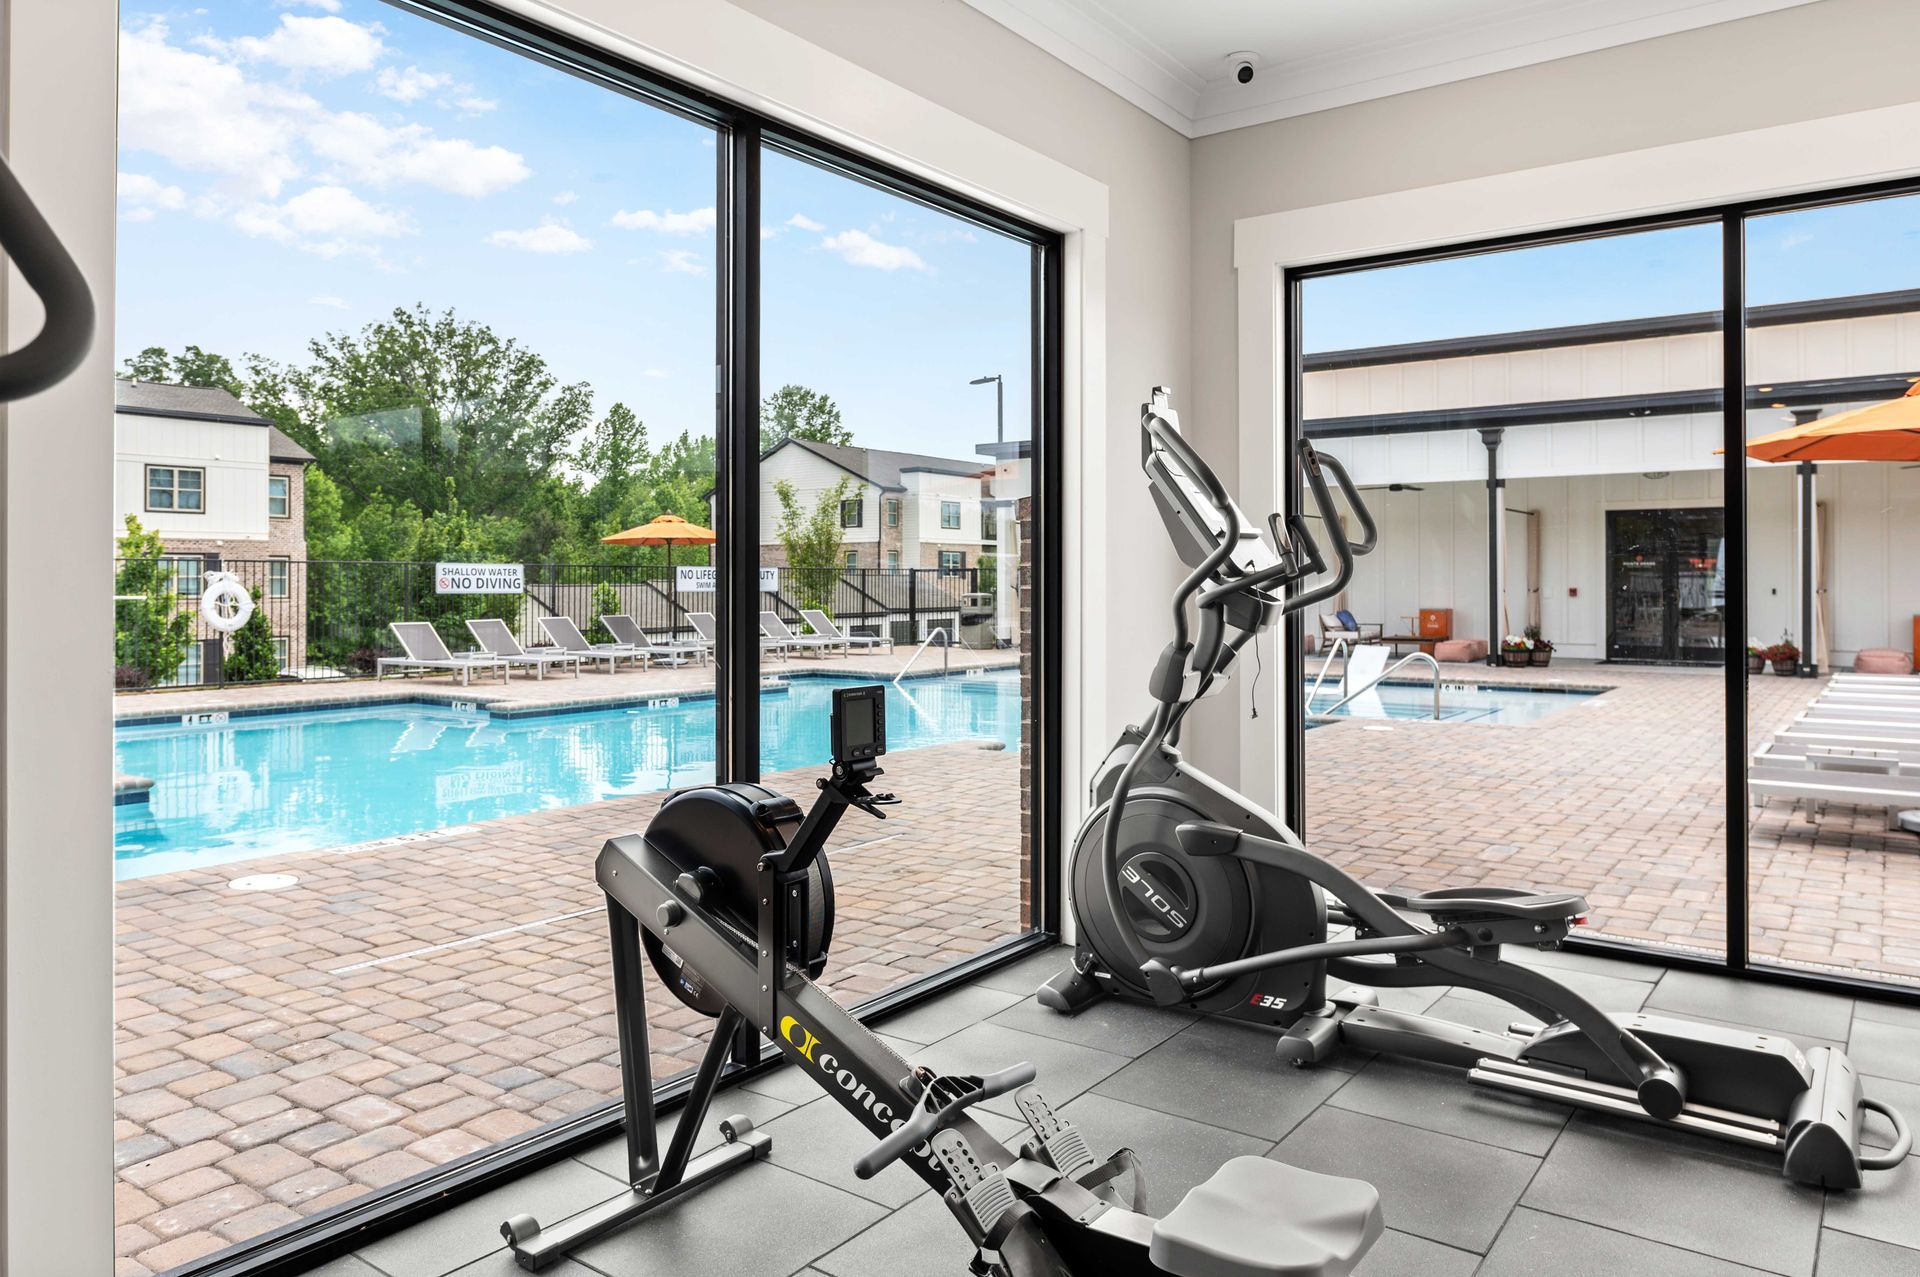 A fitness center with a rowing machine and an elliptical machine.